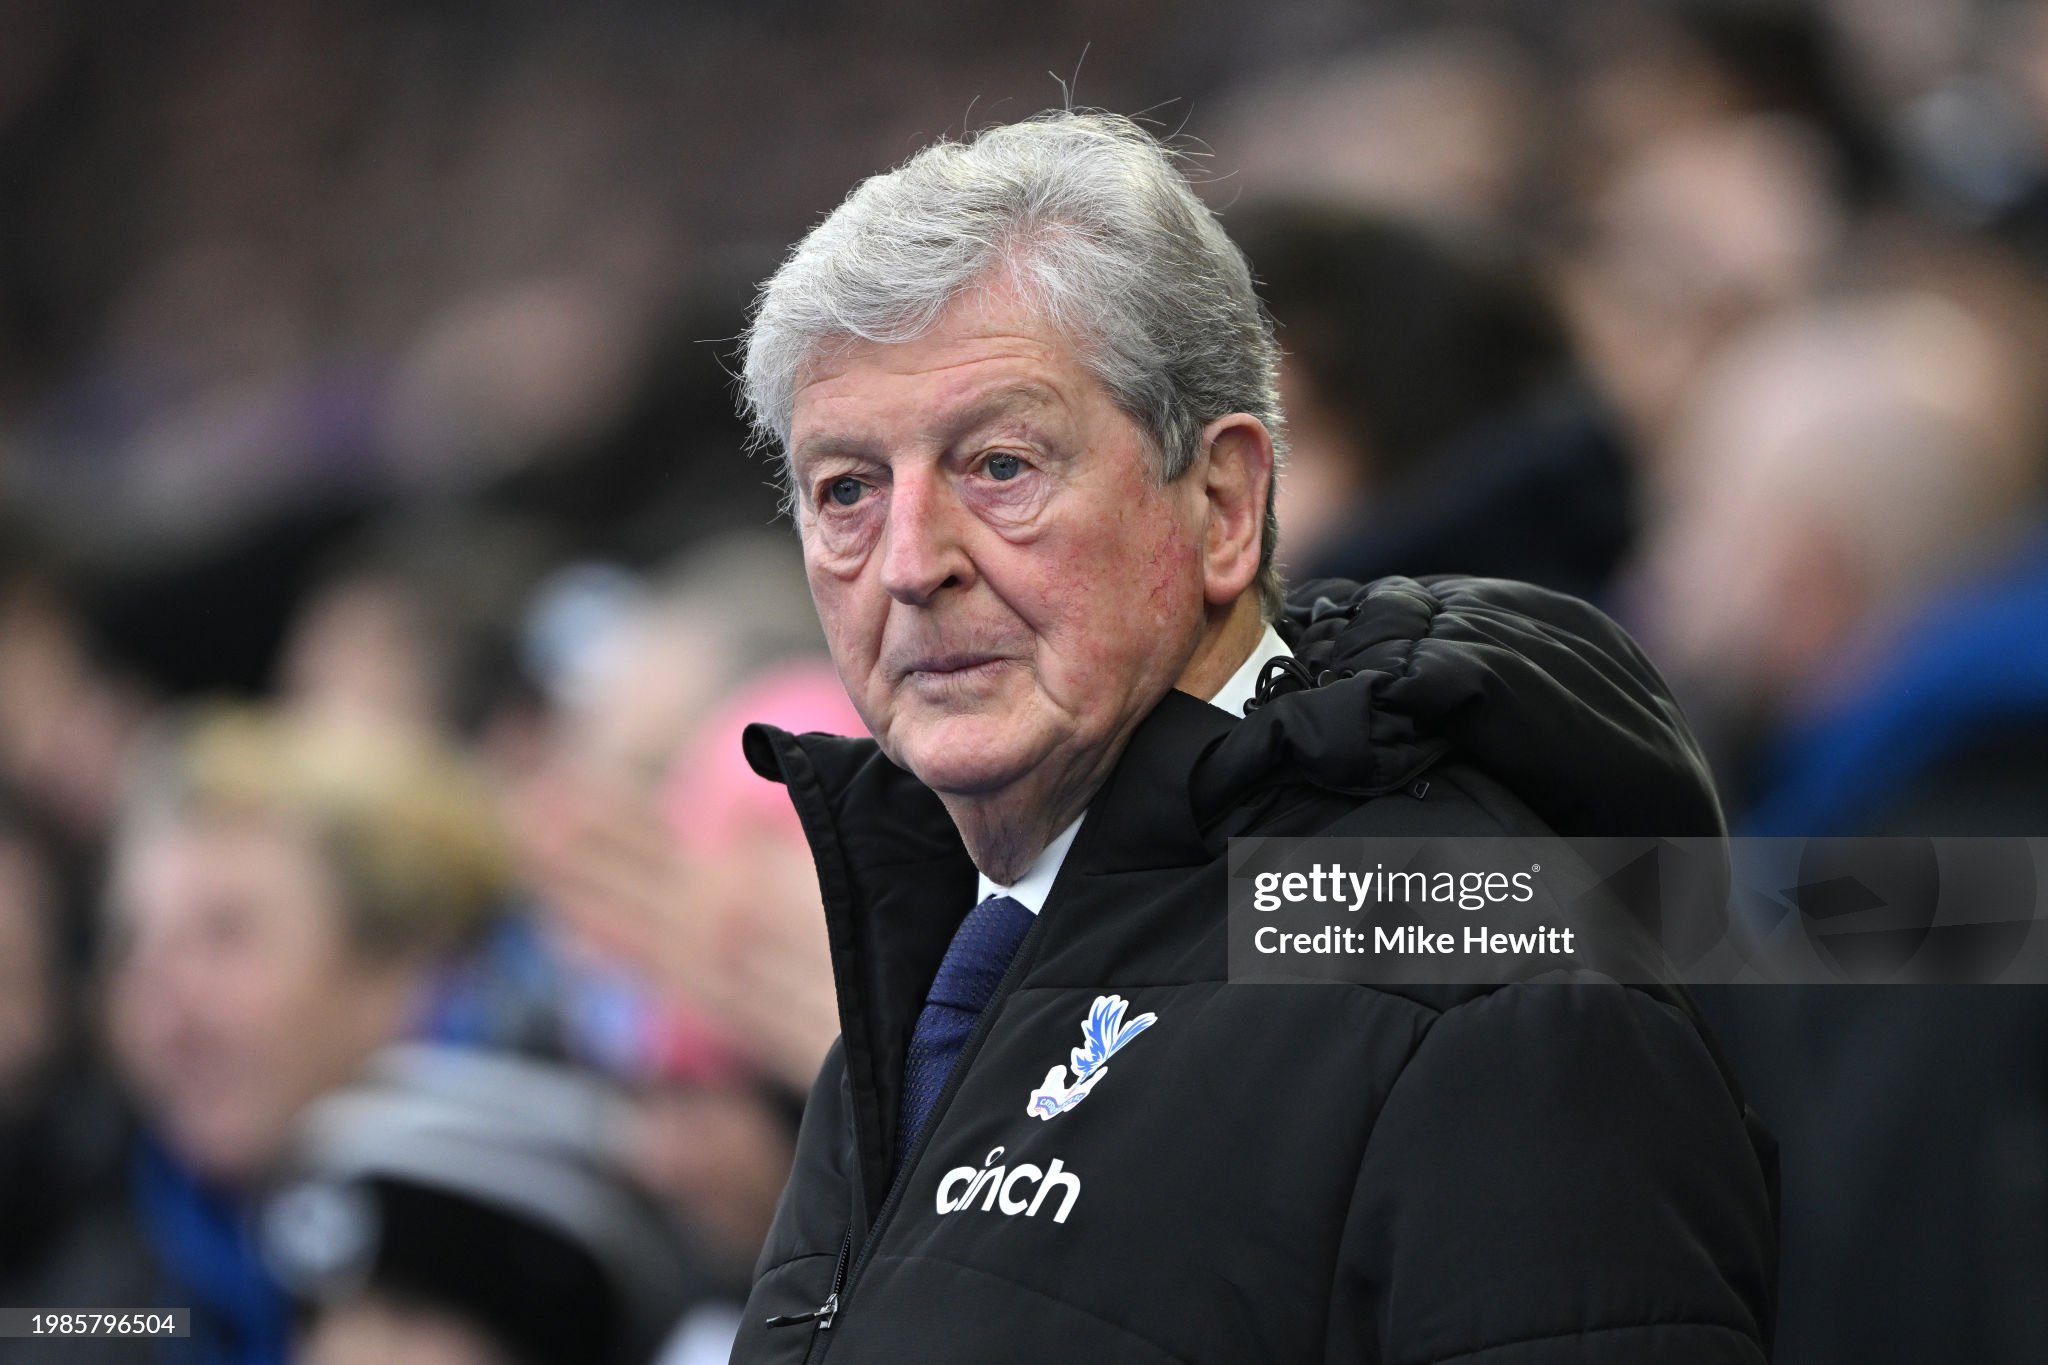 Crystal Palace Considers Dismissing Coach, But No Replacement in Sight